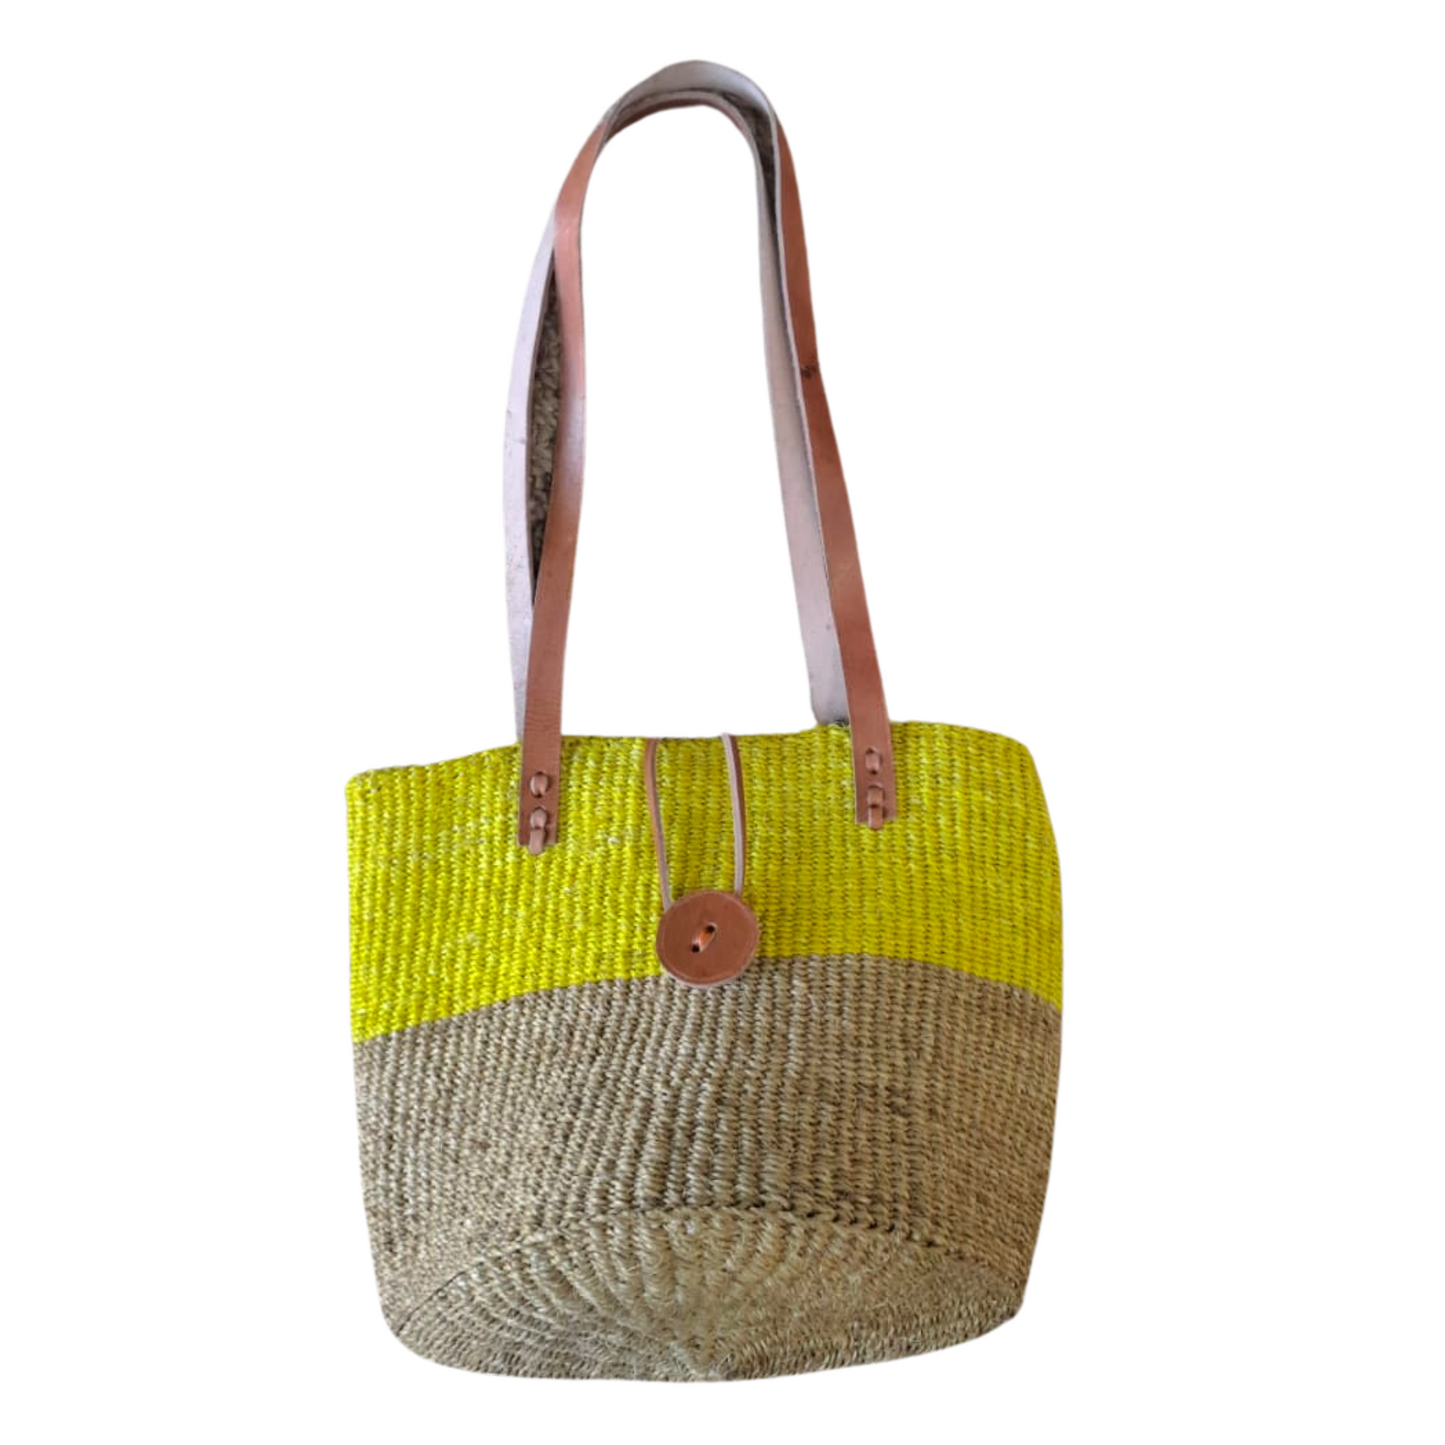 Fynly Sisal Handbags with Leather Straps